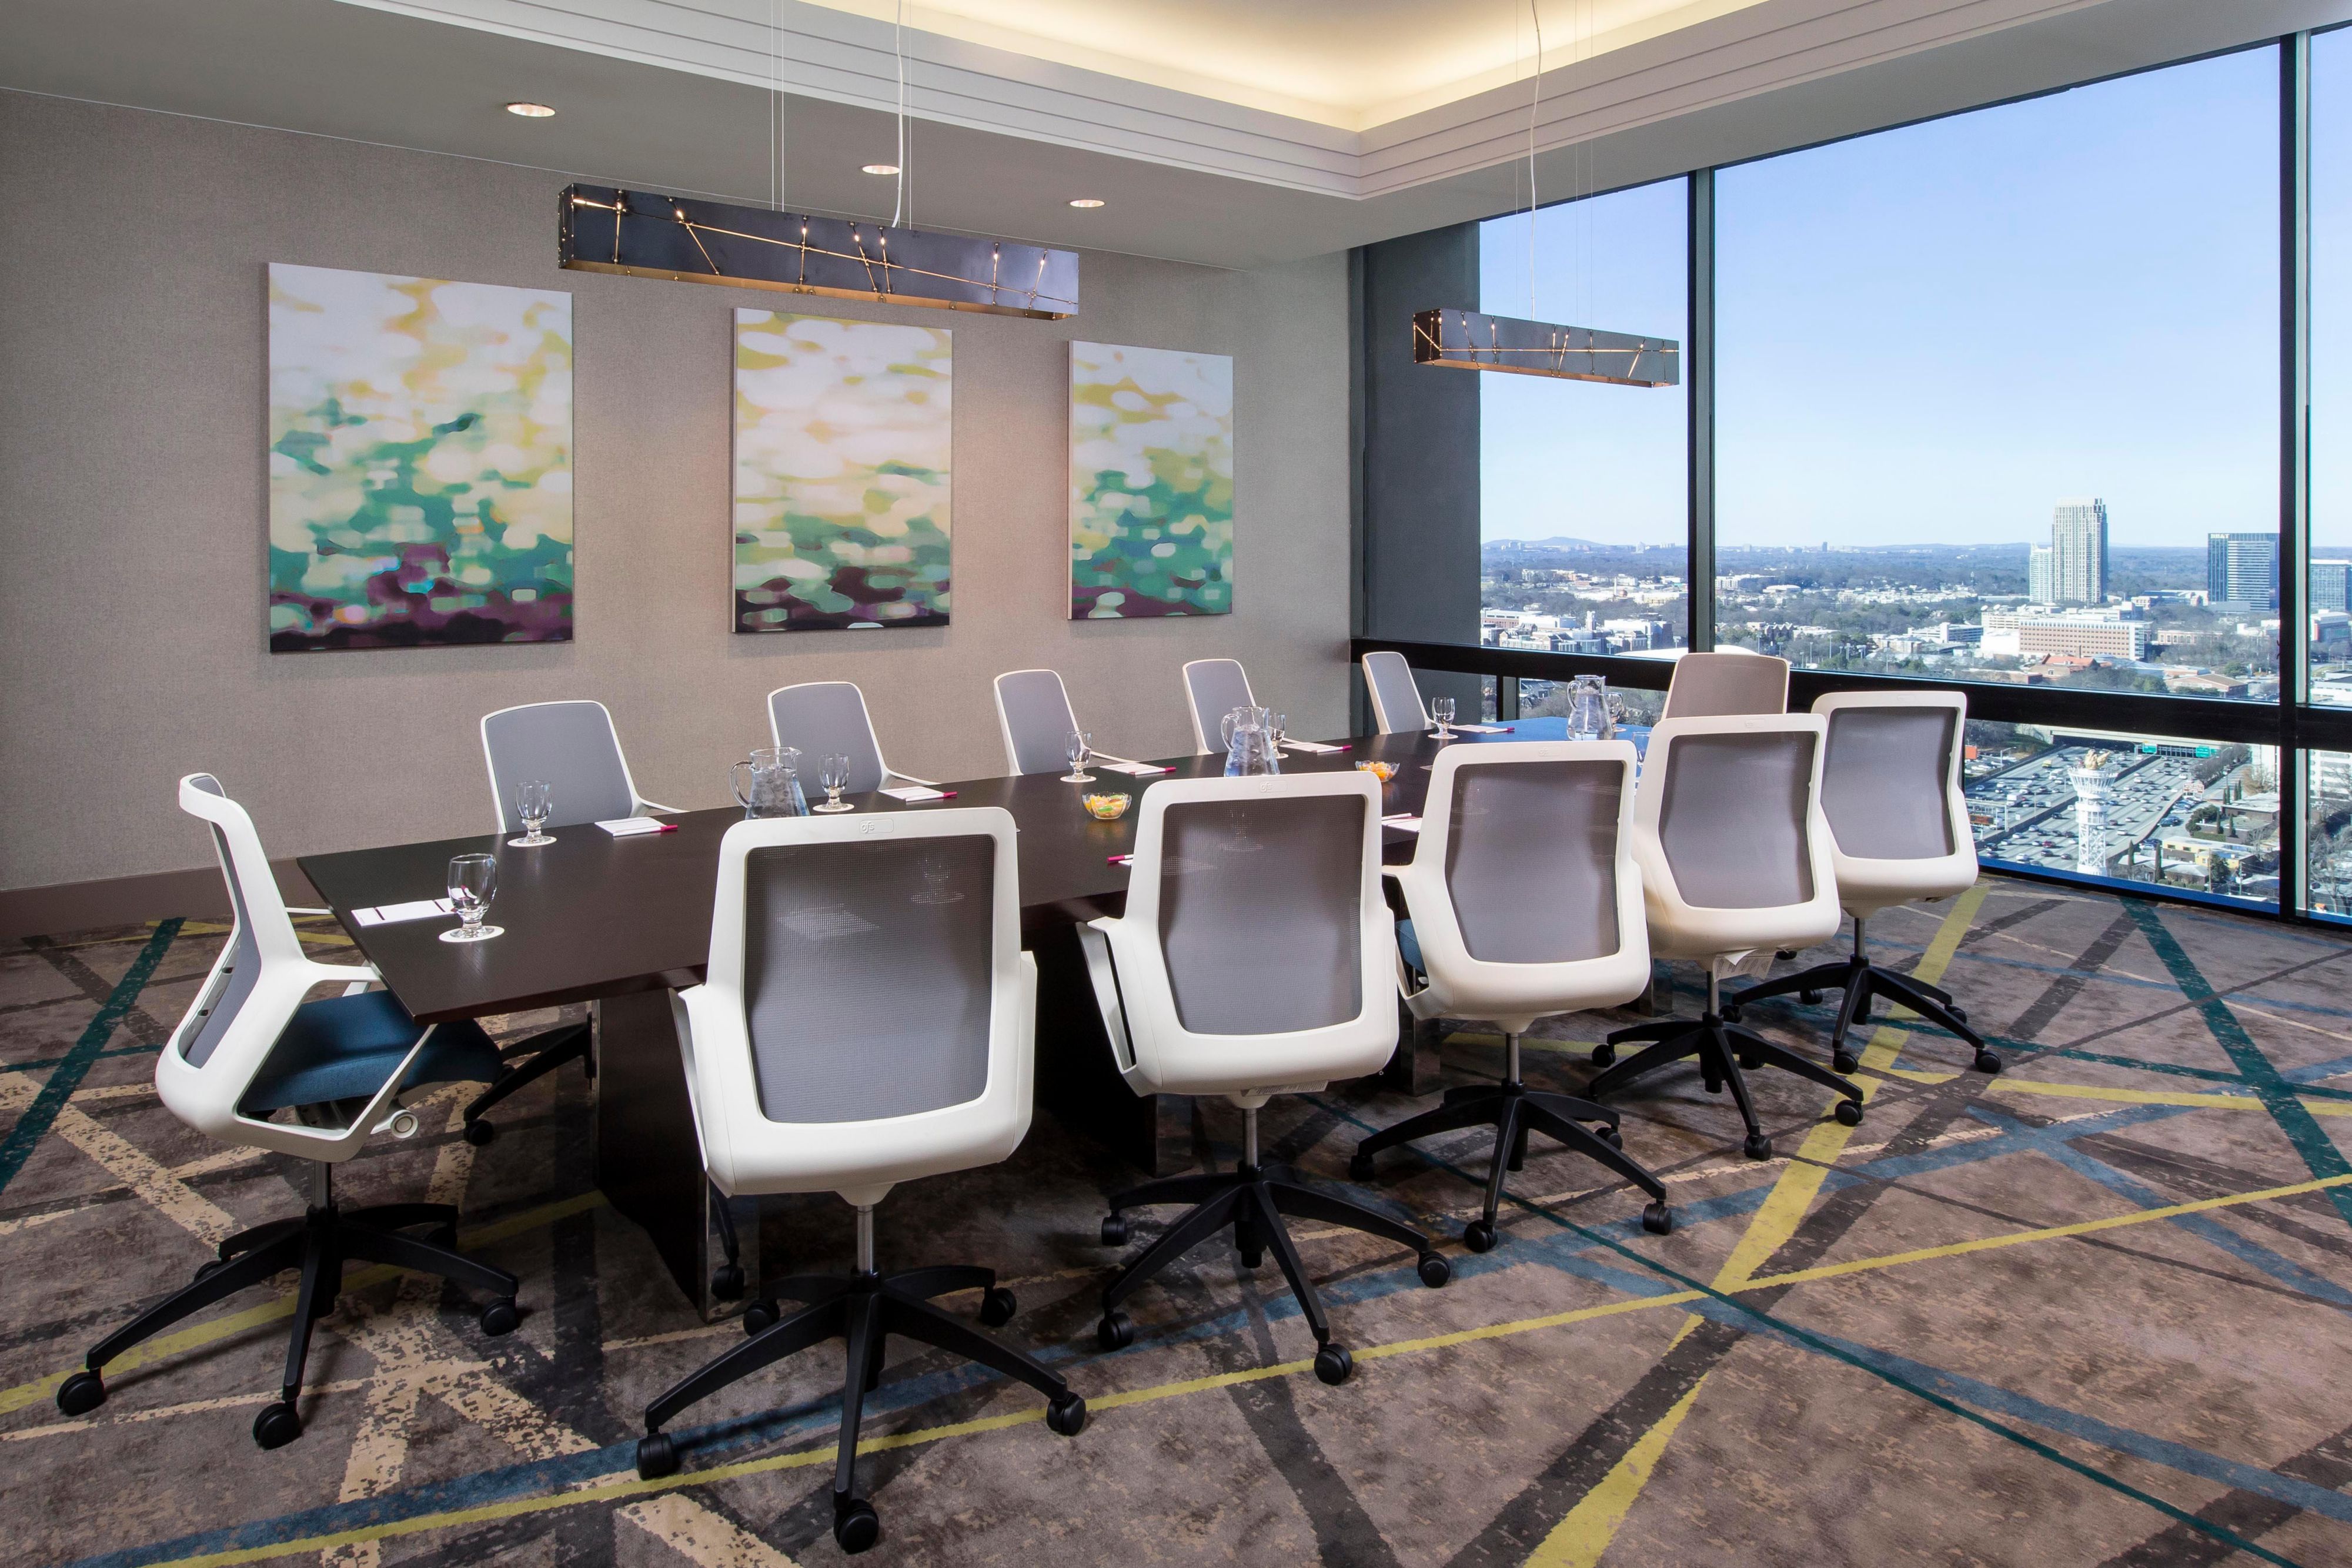 Encapsulate your guests in our SKY Boardroom